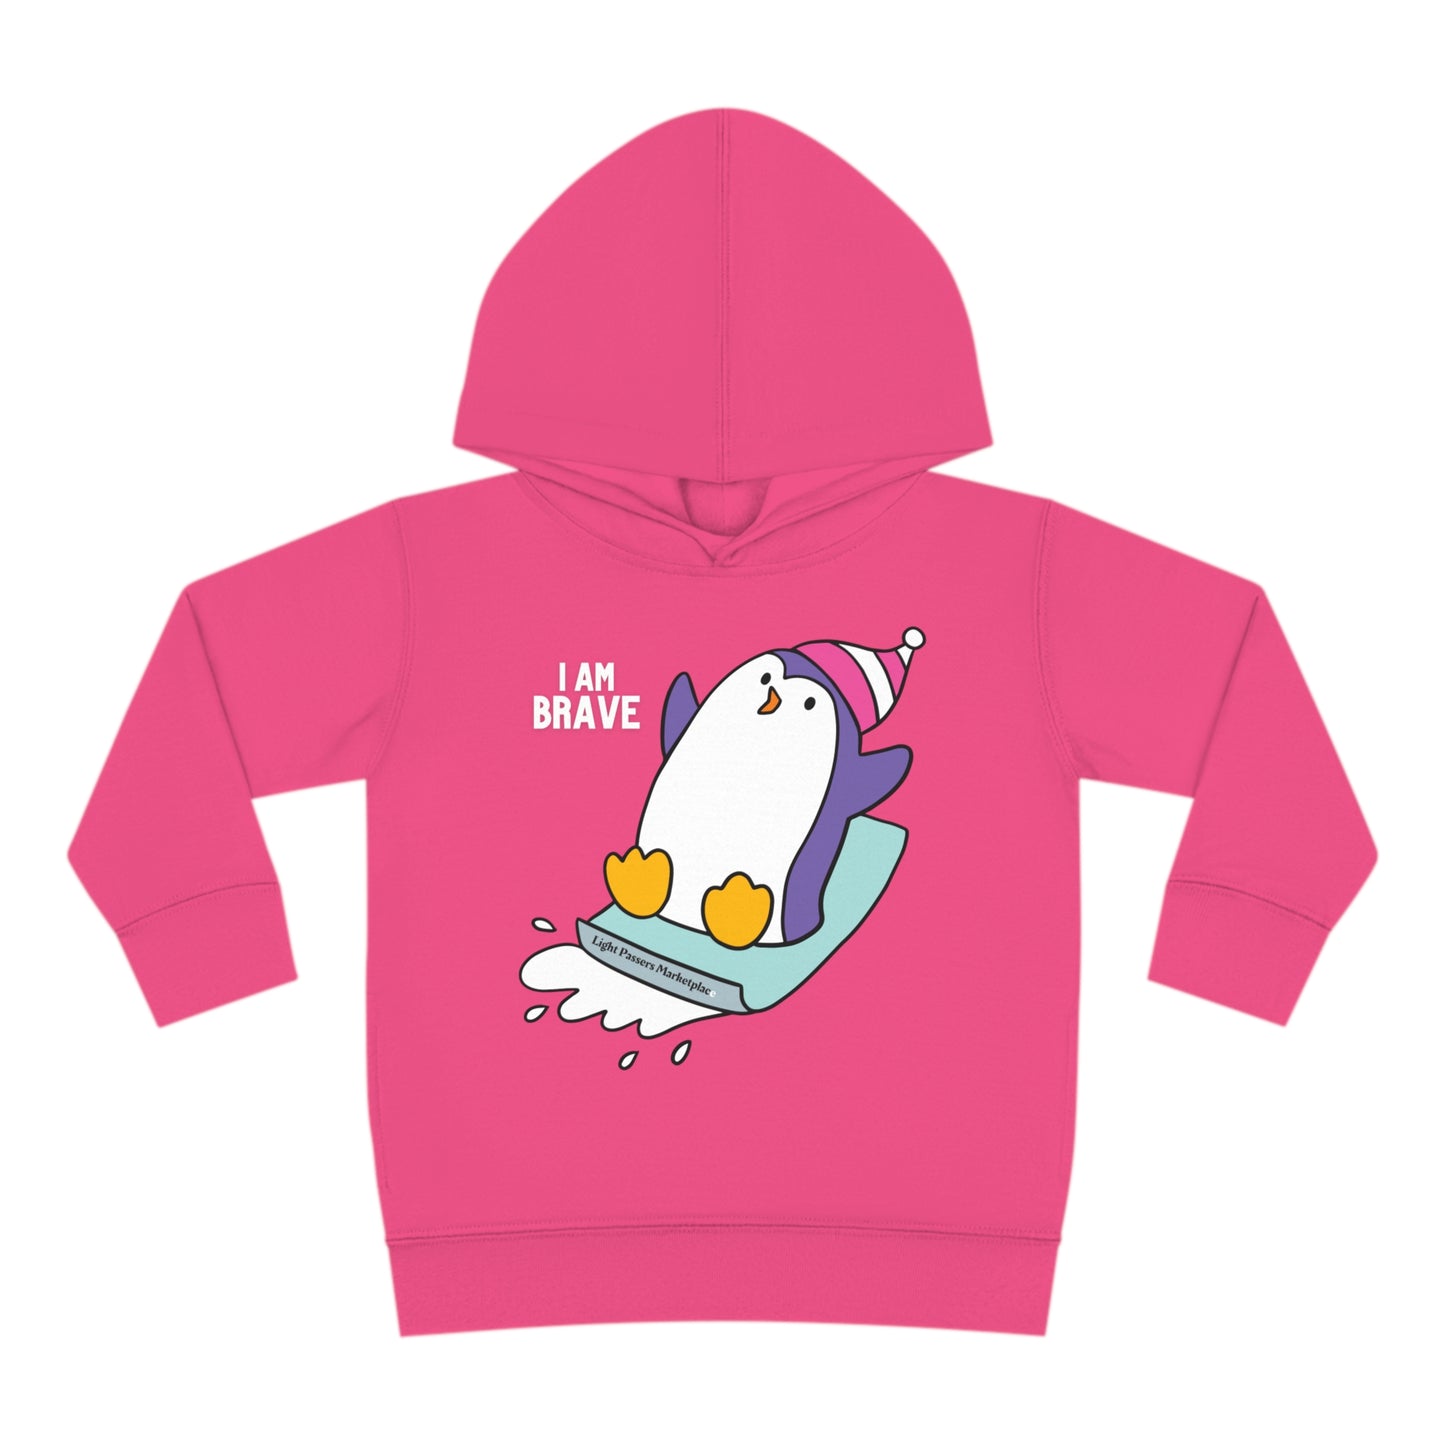 A toddler hoodie featuring a brave penguin design on the front, with jersey-lined hood, cover-stitched details, side seam pockets, and durable construction for lasting coziness.